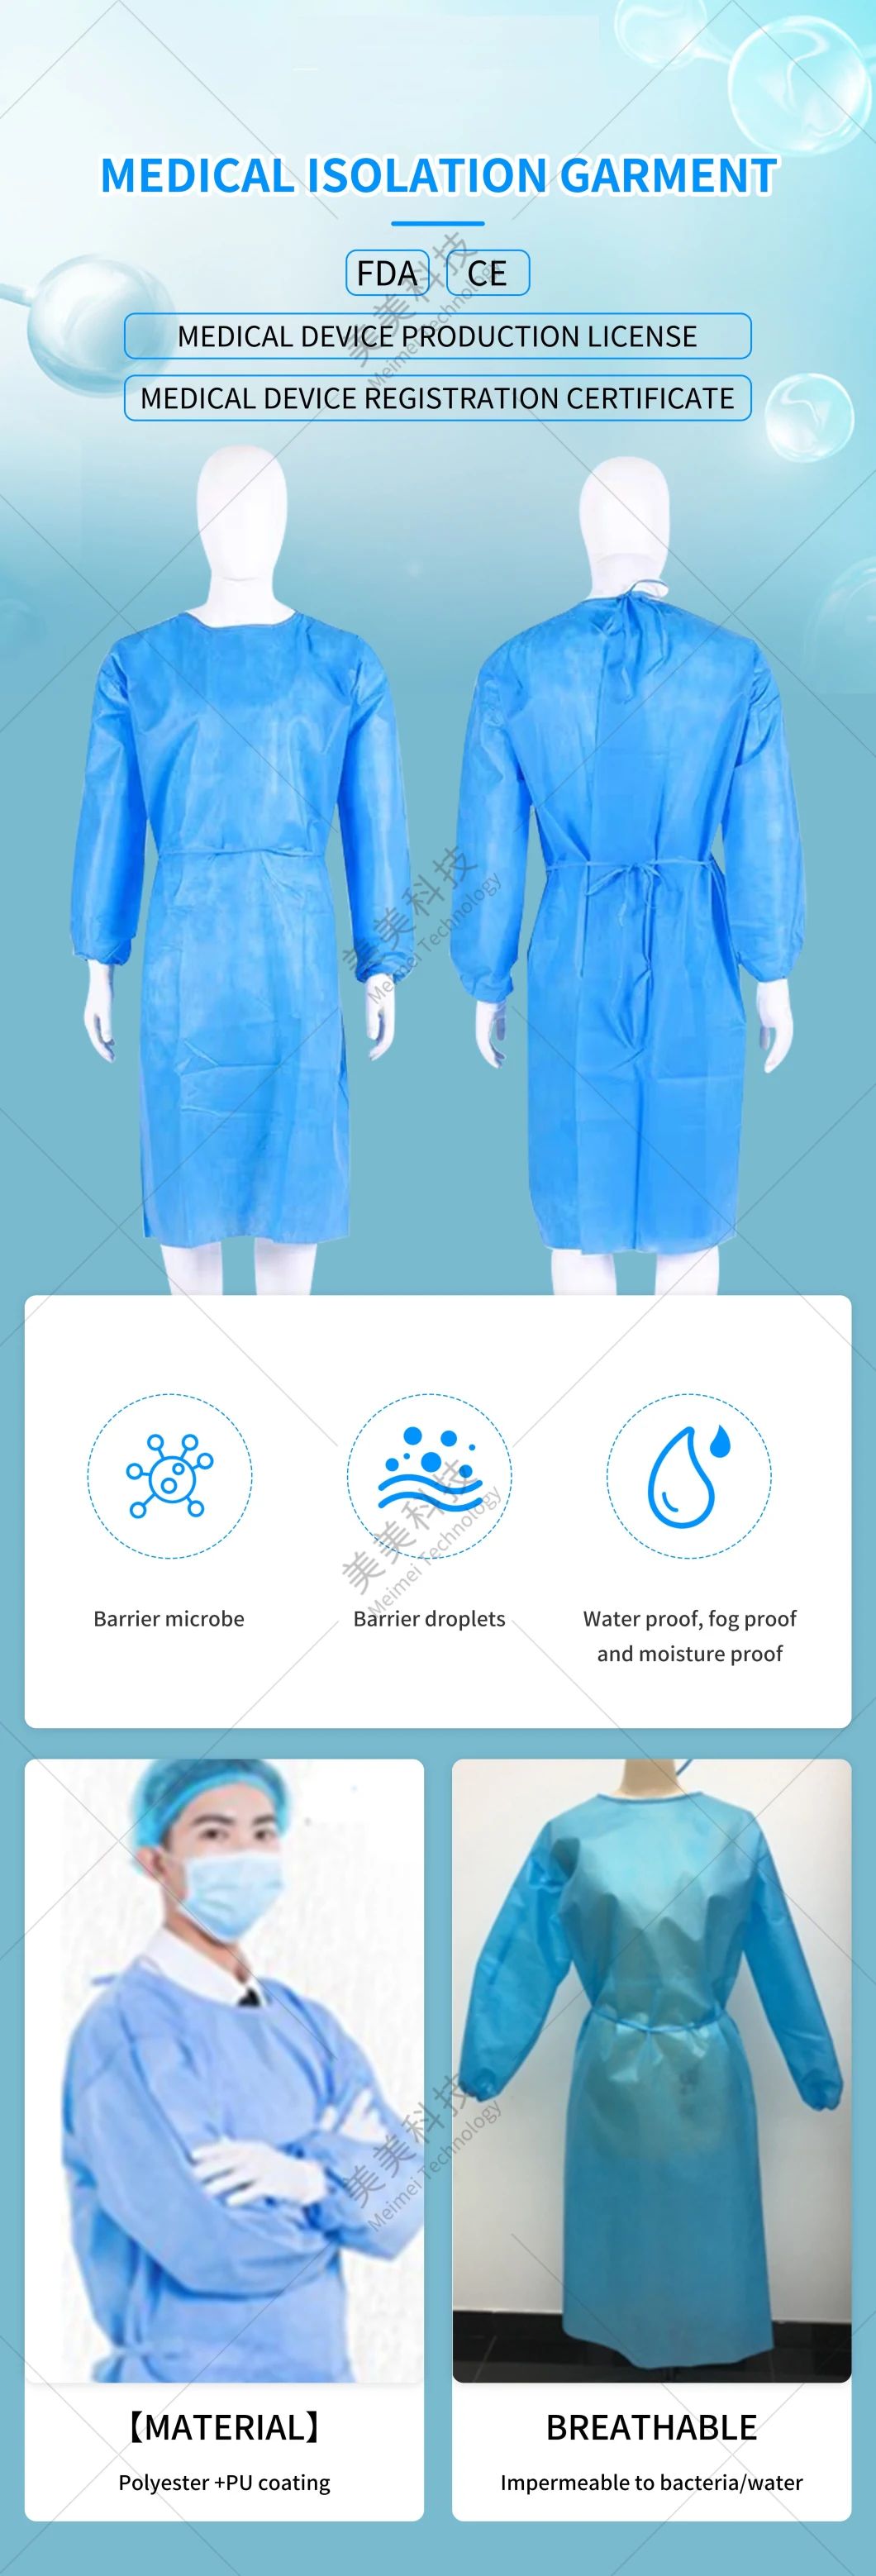 Protective Gown Plus Shoe Cover Medical Garment Cover Insoaltion Clothing Isolation Gown PPE Safety Gown